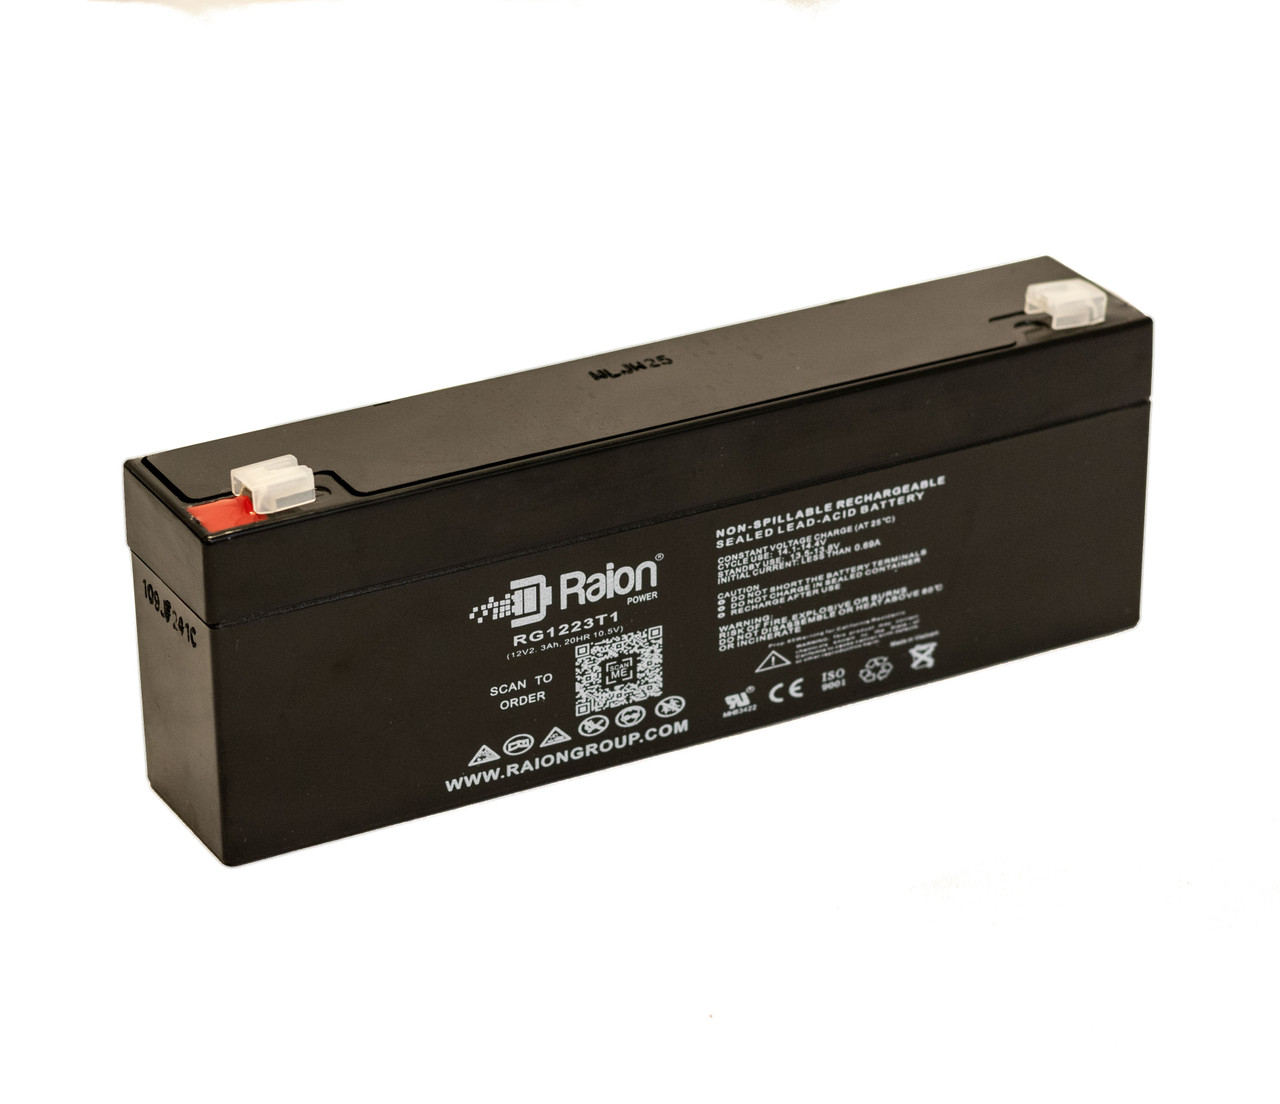 Raion Power RG1223T1 Replacement Battery for Sscor S-SCORT 9